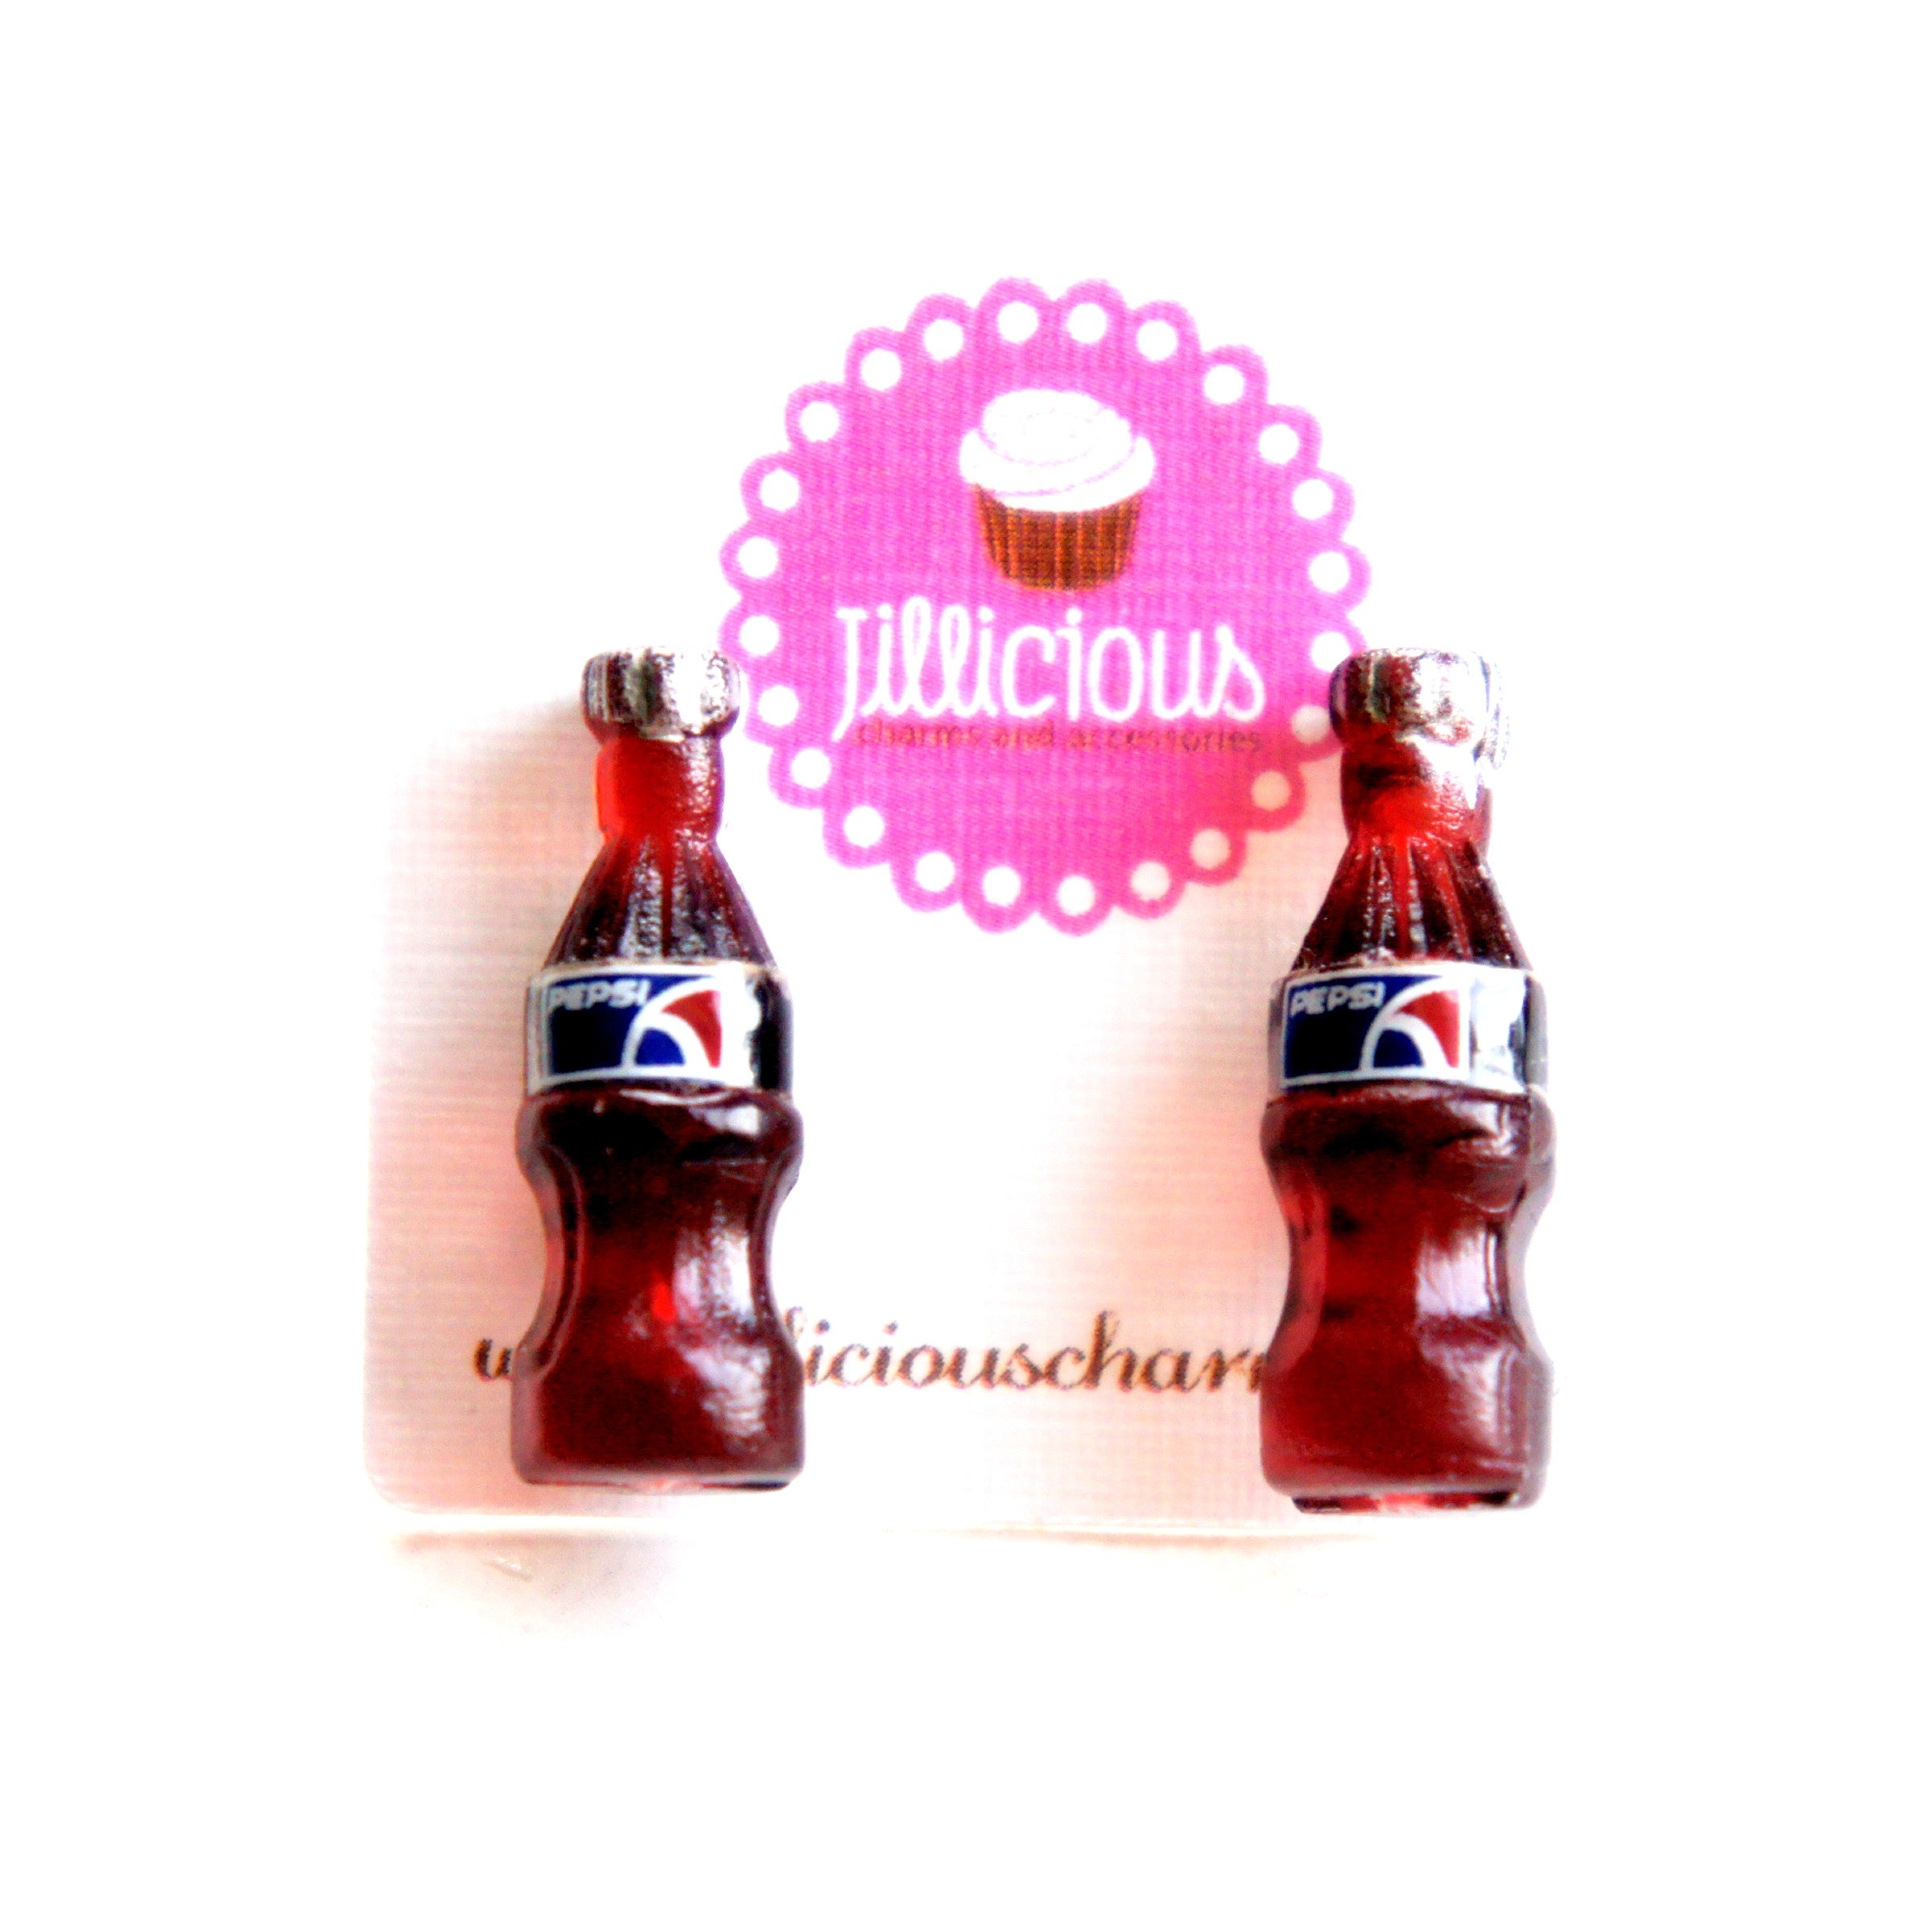 Soda Bottle Earrings - Jillicious charms and accessories